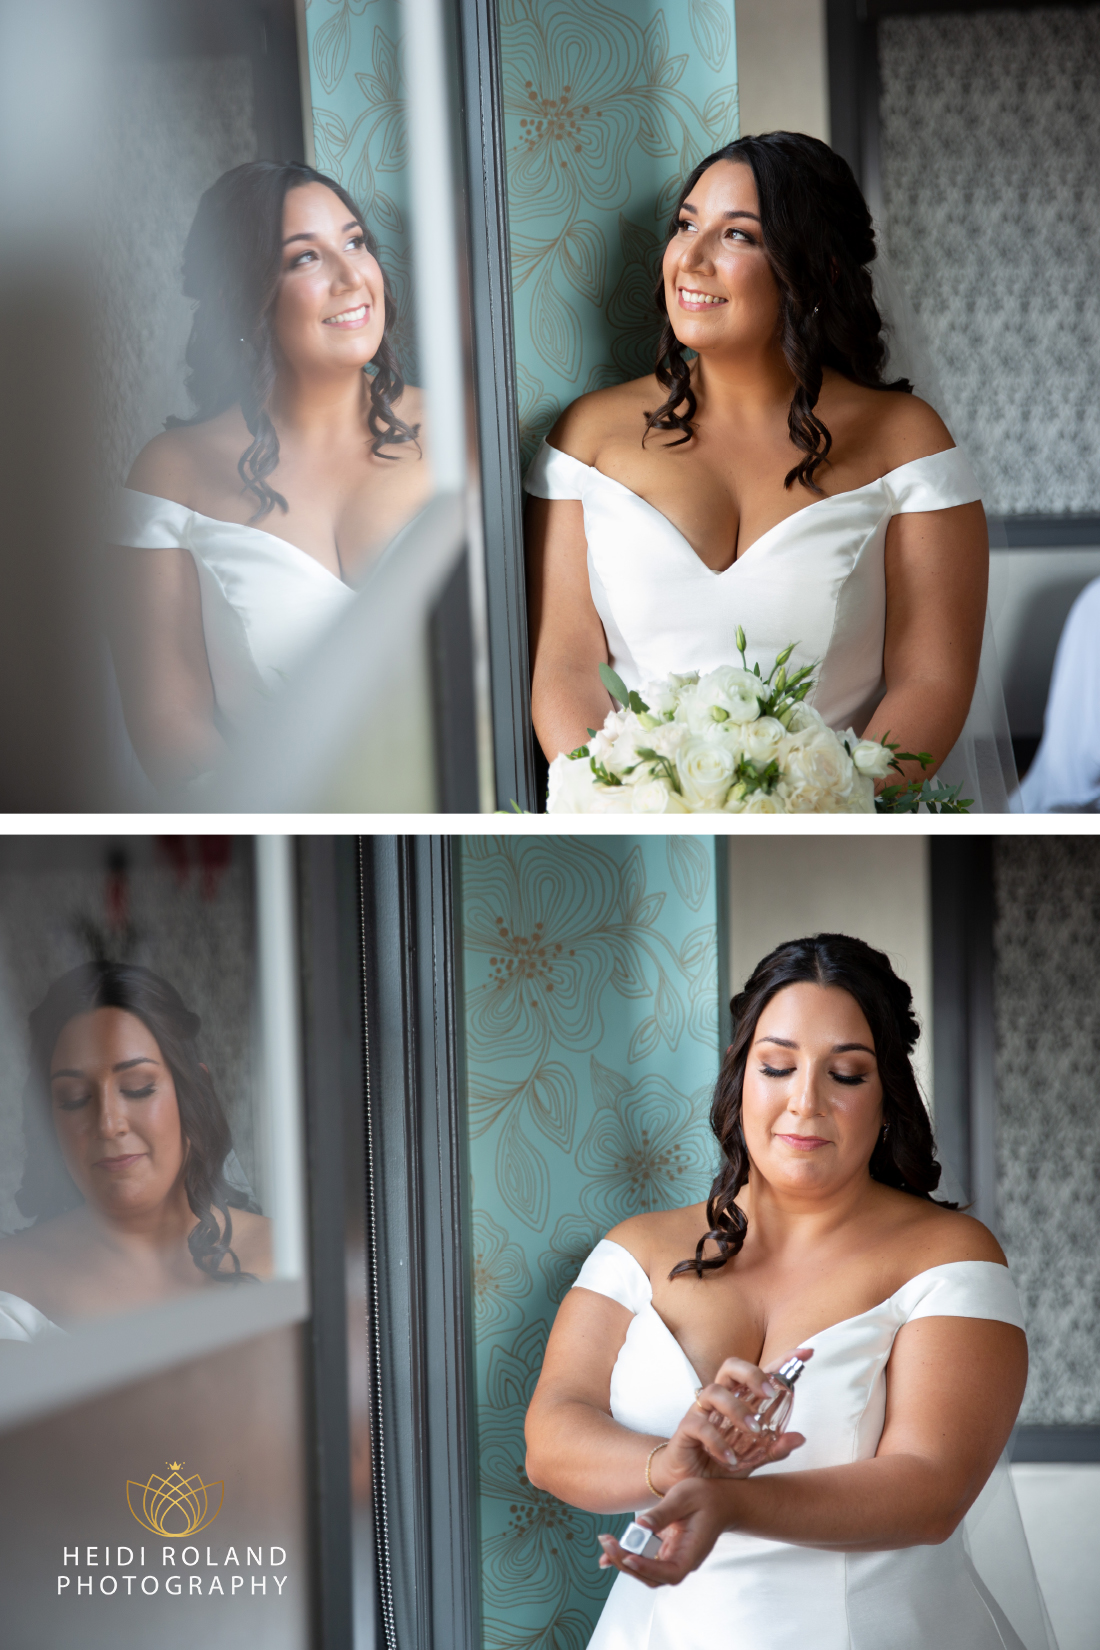 Bride looking out the window in her wedding dress by Heidi Roland Photography